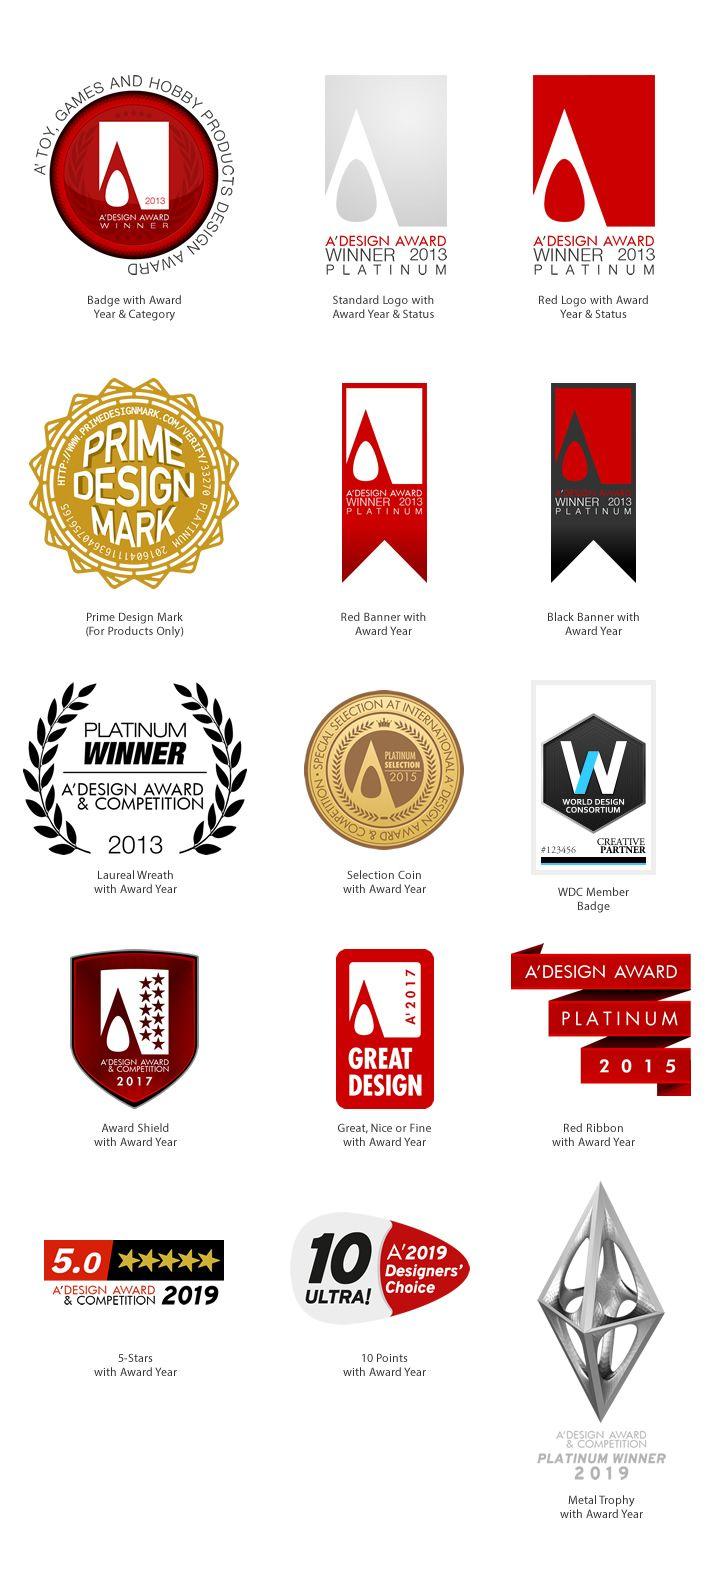 Winner Logo - A' Design Award and Competition - Award Logo and Badges